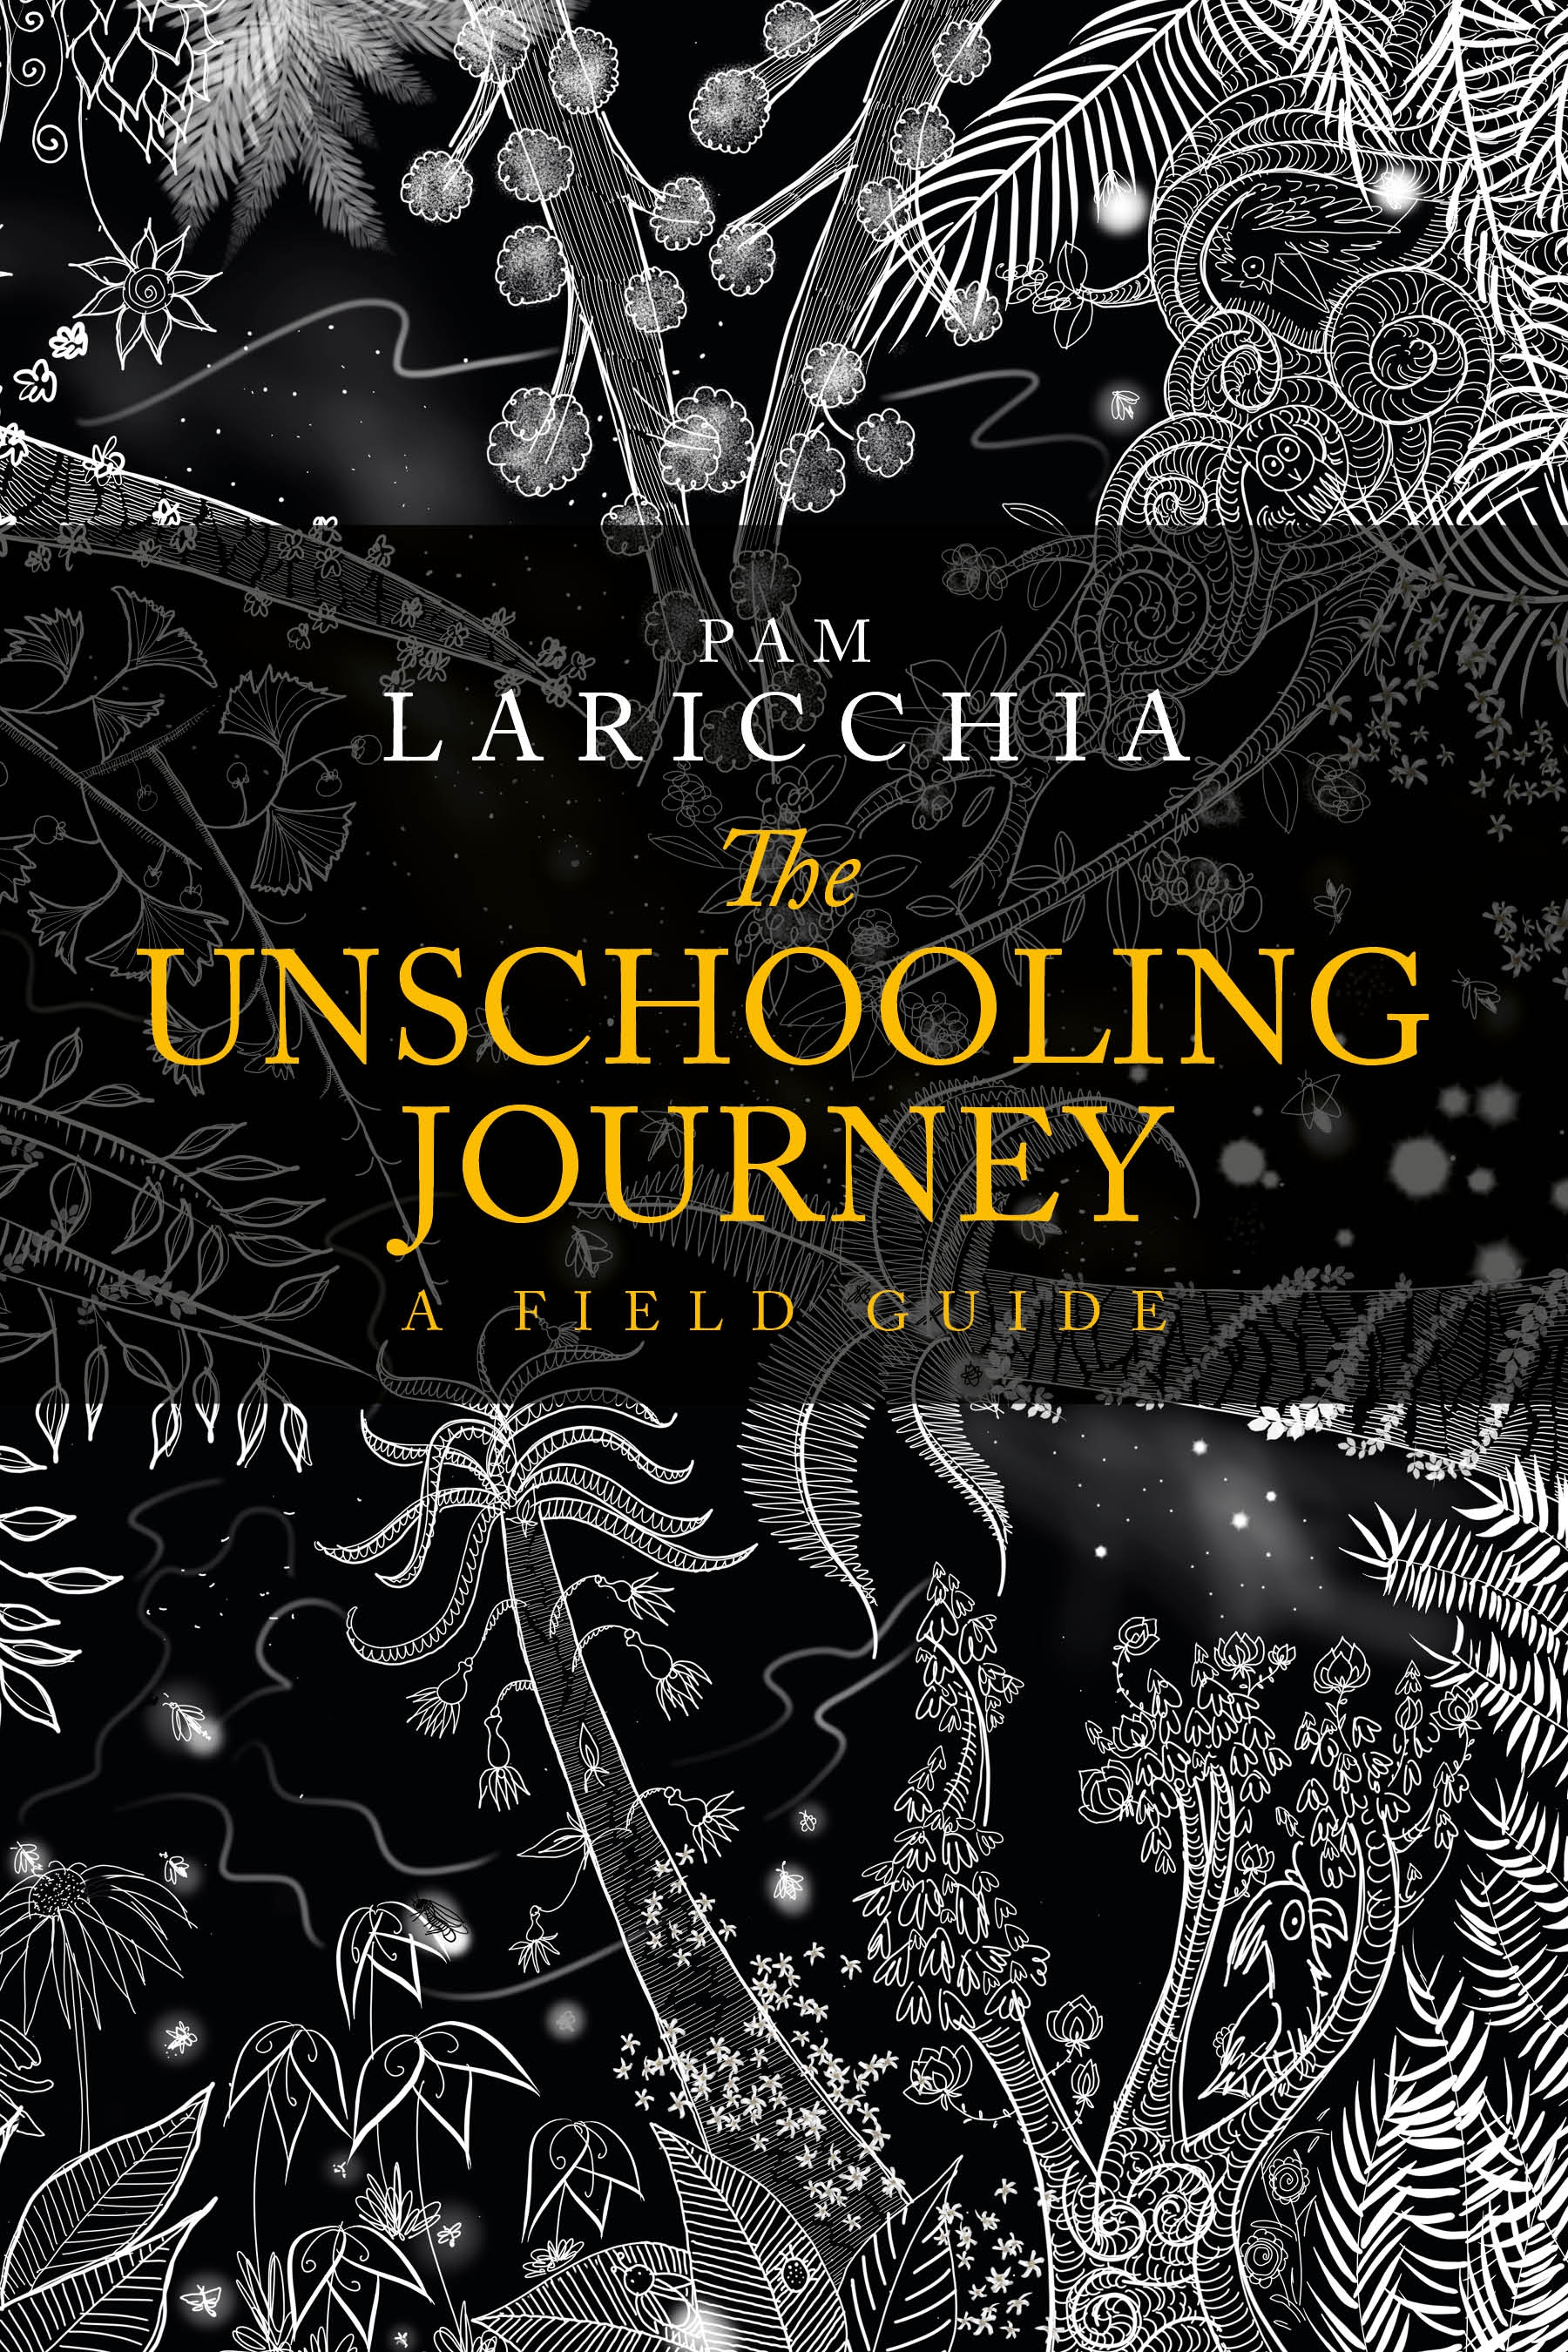 Contents The UNSCHOOLING JOURNEY A FIELD GUIDE Pam Laricchia - photo 1